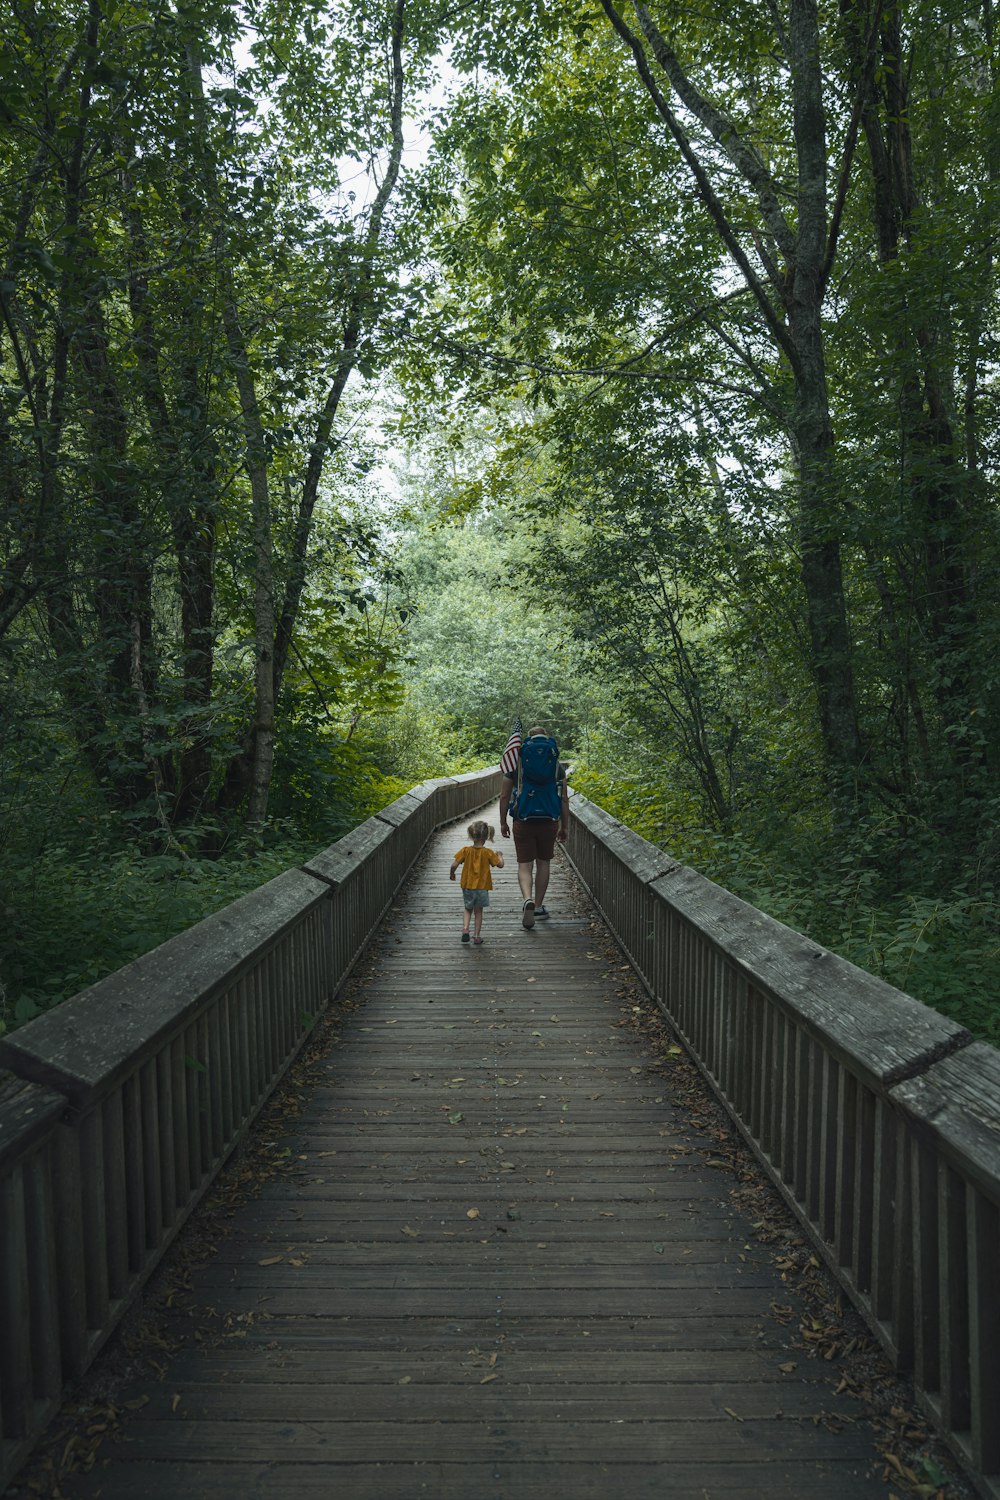 a person and a child walking on a wooden bridge in the woods